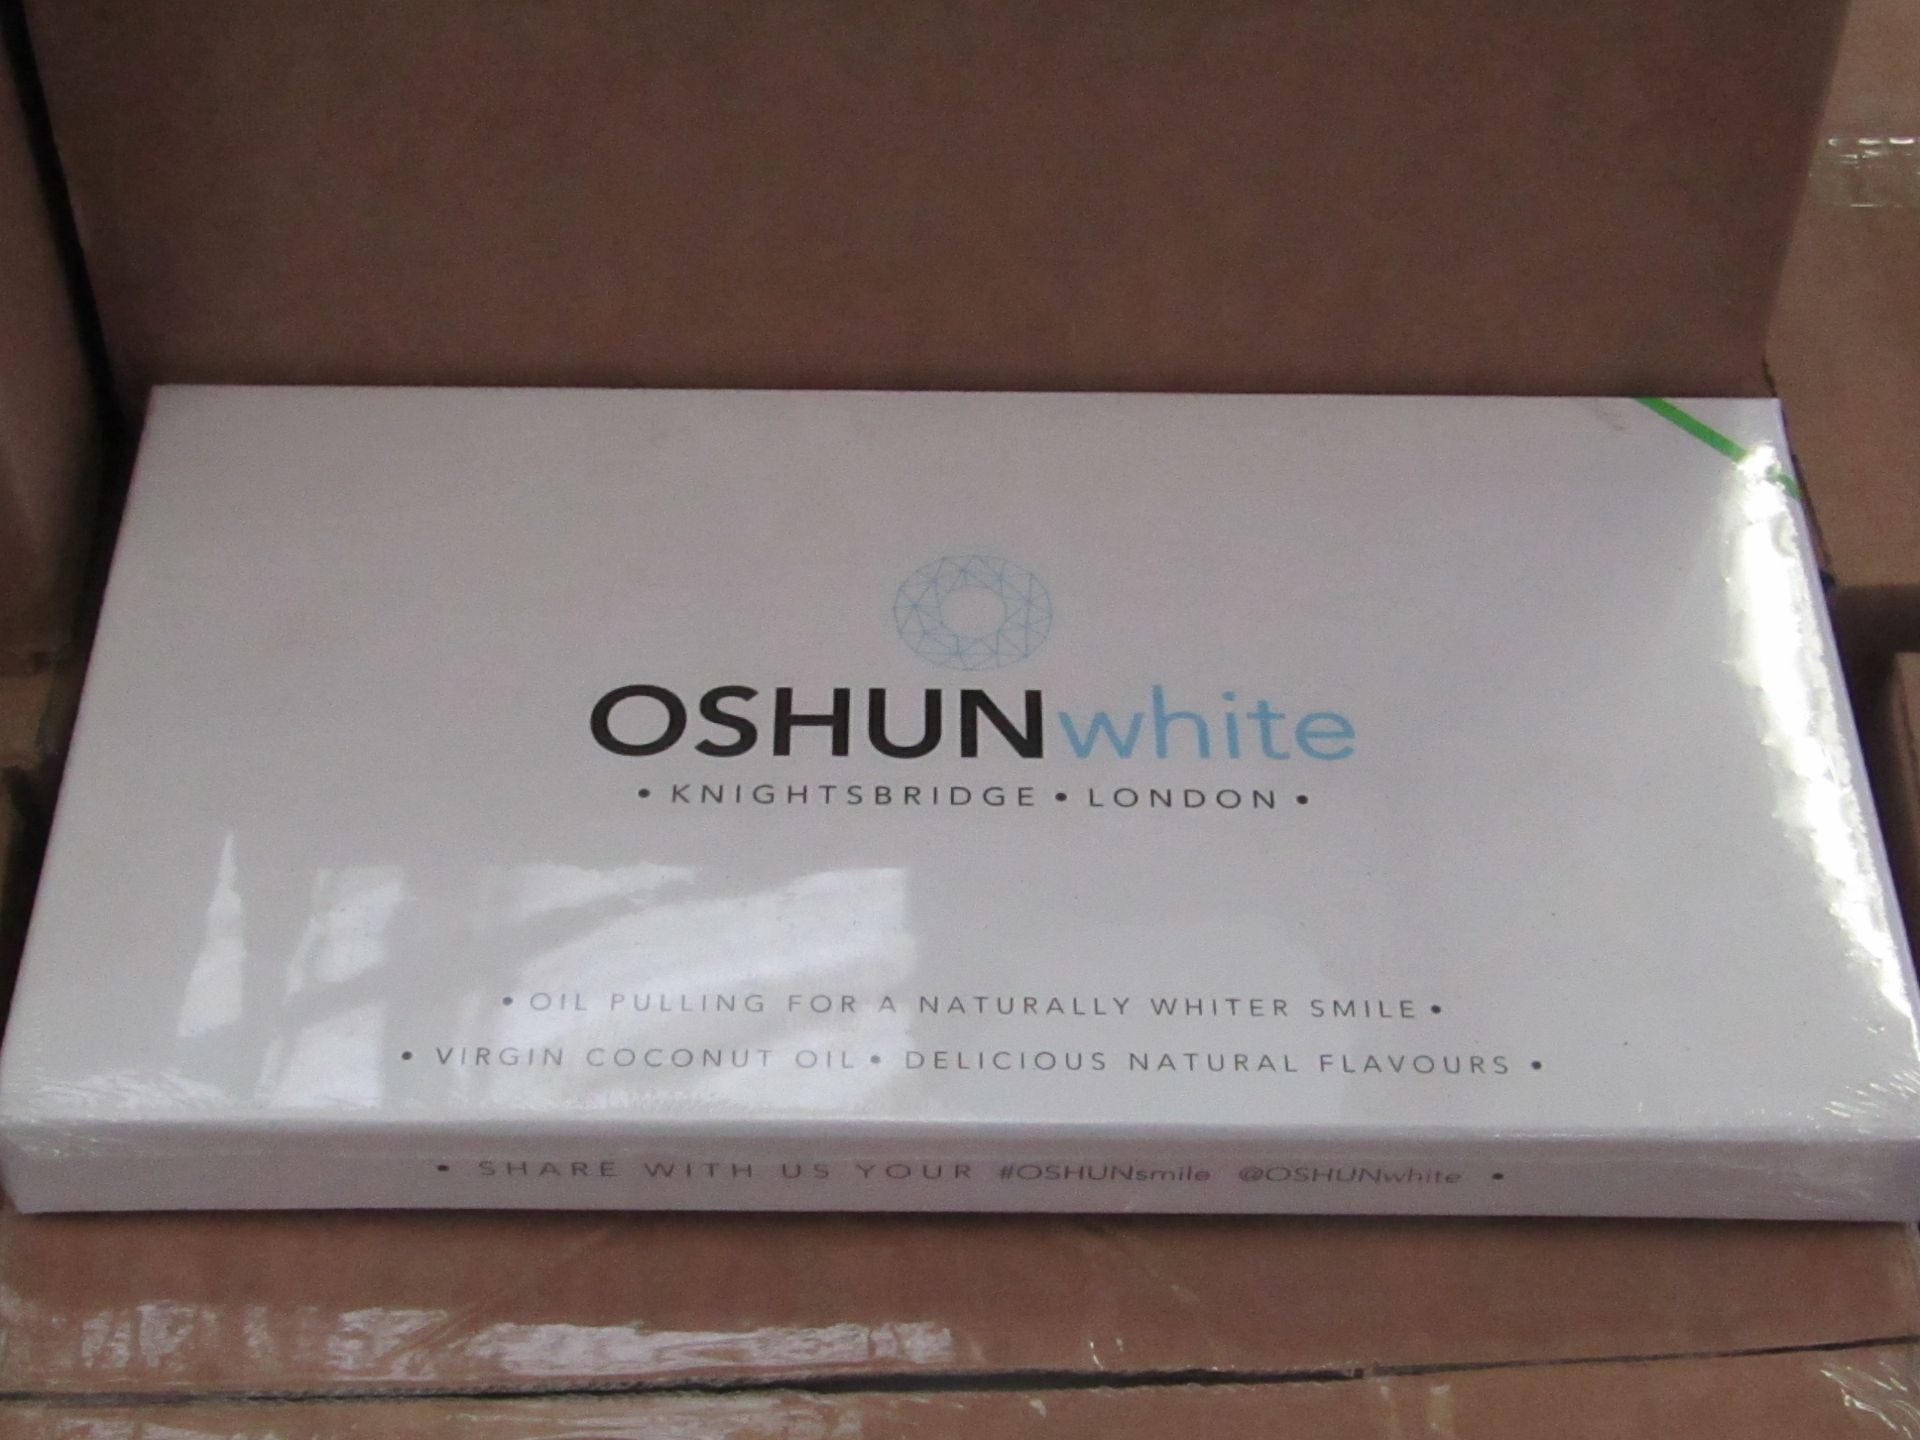 20x Oshun White crushed lime flavoured teeth whitening kits, all new and boxed.